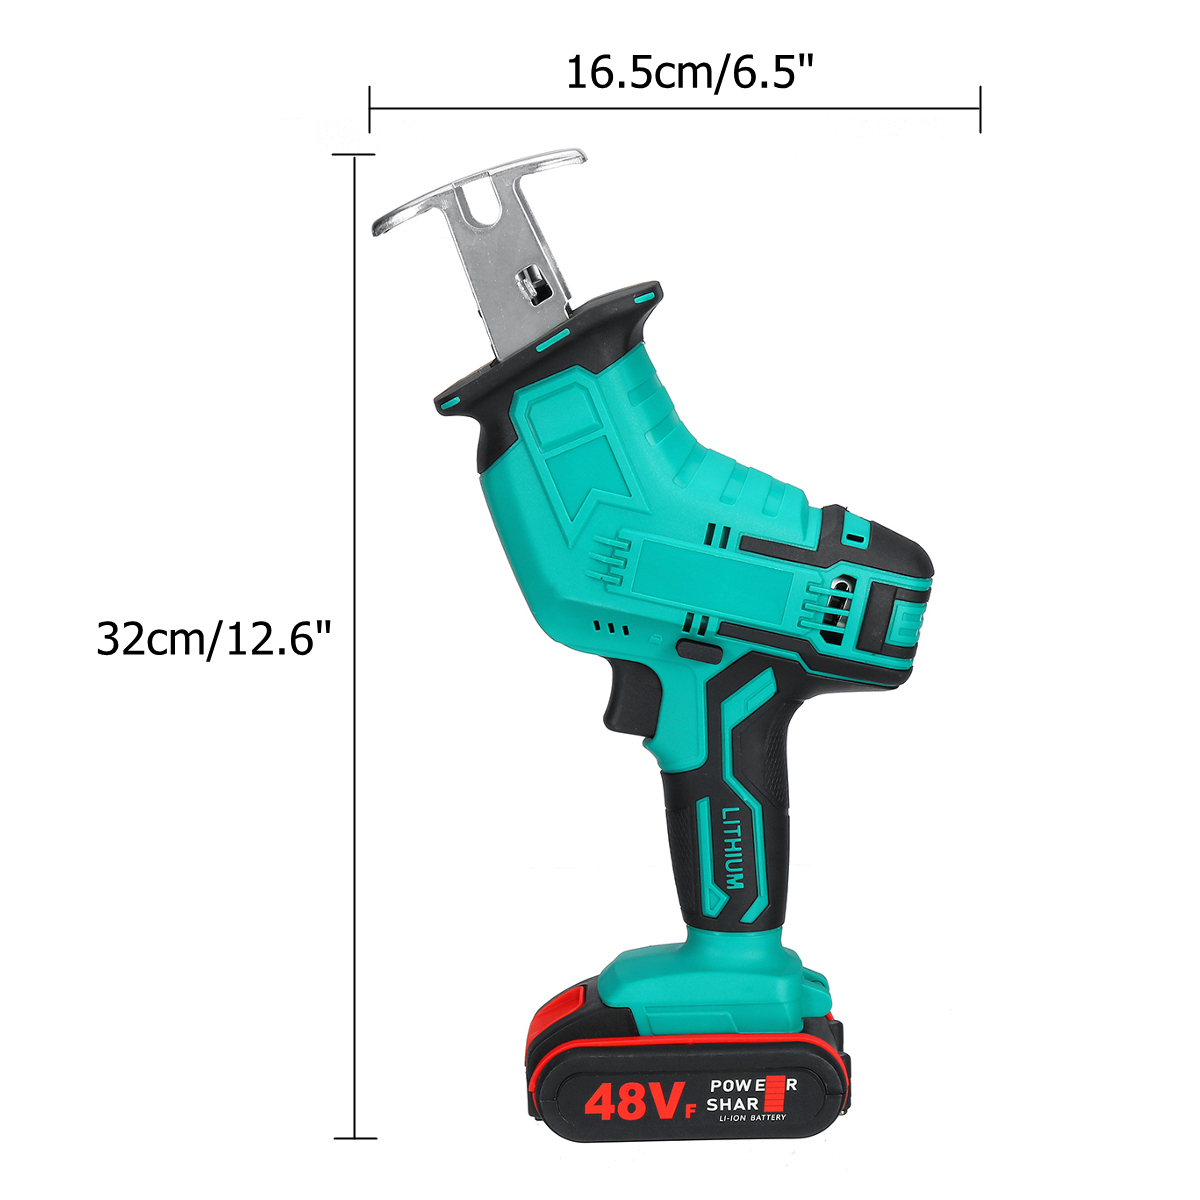 Electric-Cordless-Reciprocating-Saw-4-Blades-Battery-Charger-Saw-Power-Tool-1732002-3